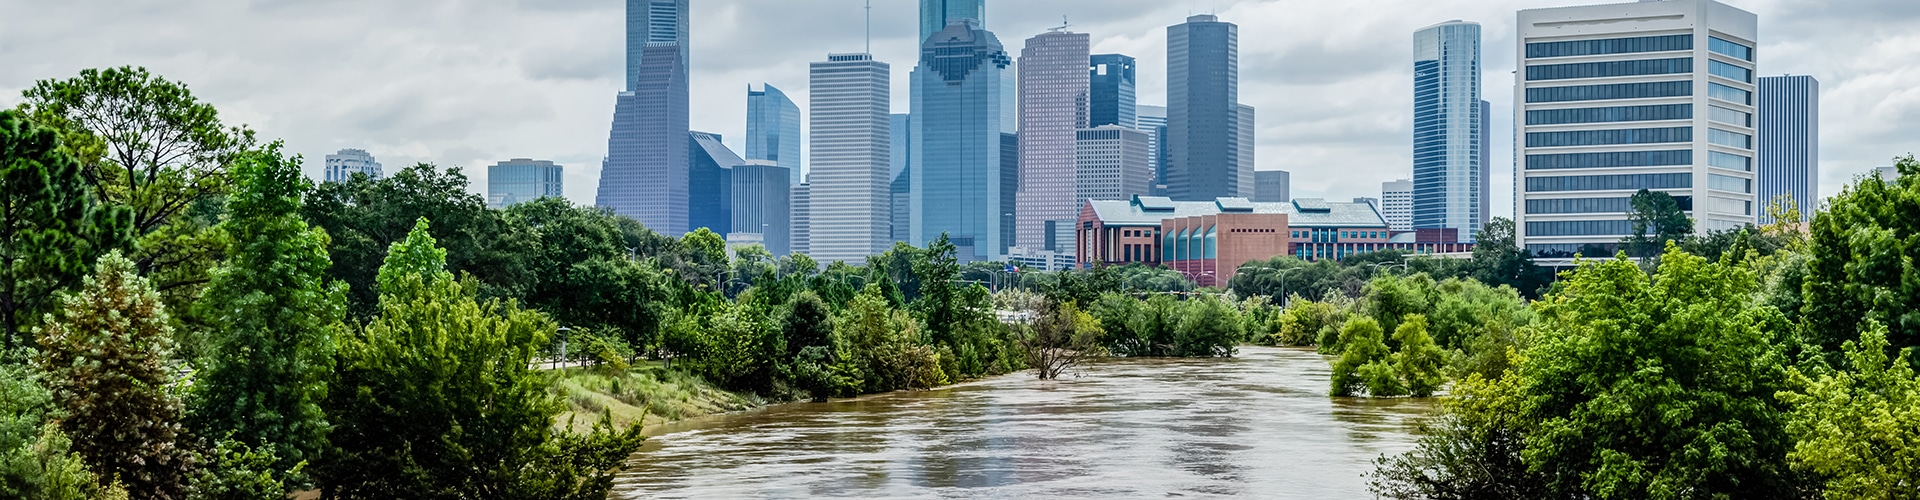 High And Fast Water Rising In Bayou River With Downtown Houston